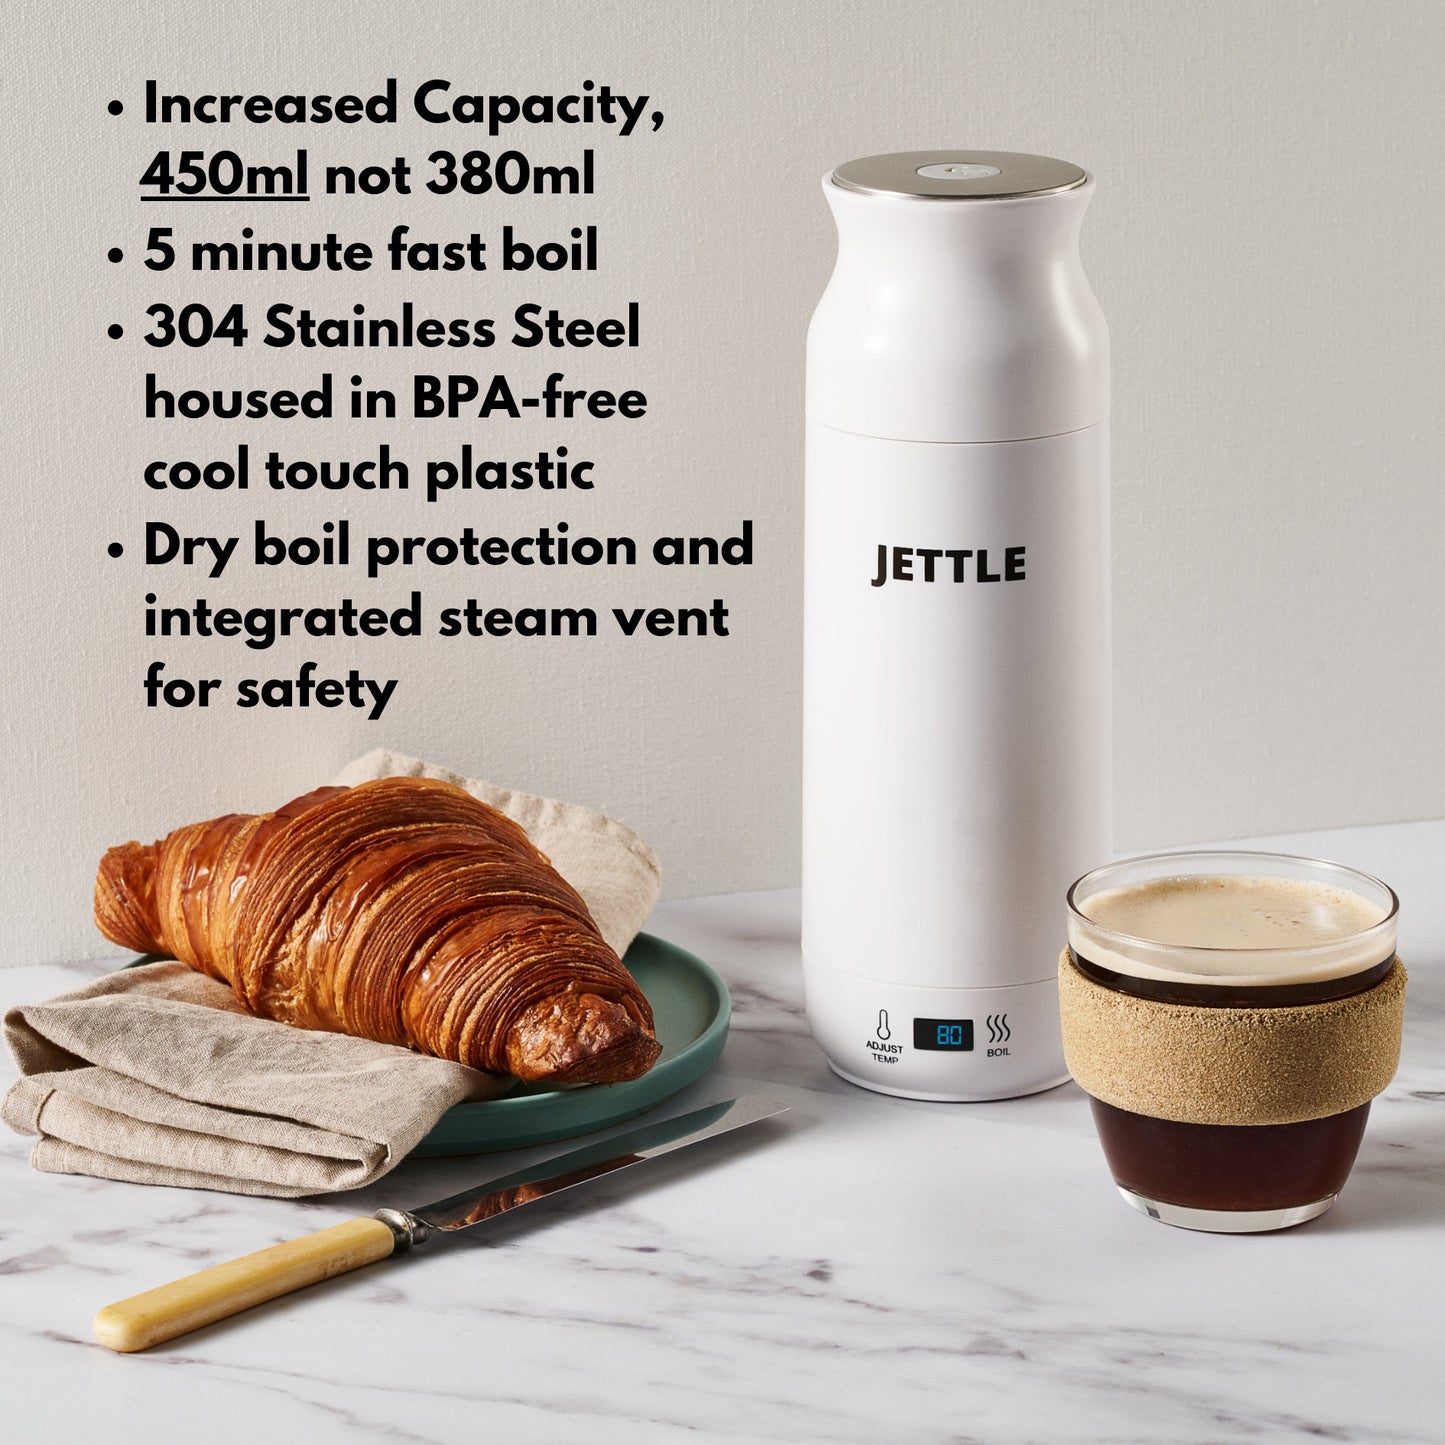 Jettle Electric Kettle - Travel Portable Heater for Coffee, Tea, Milk, Soup - Stainless Steel Travel Water Boiler tea pot with Temperature Control, LED, Automatic Power Off - 450ml, Kitchen Appliance